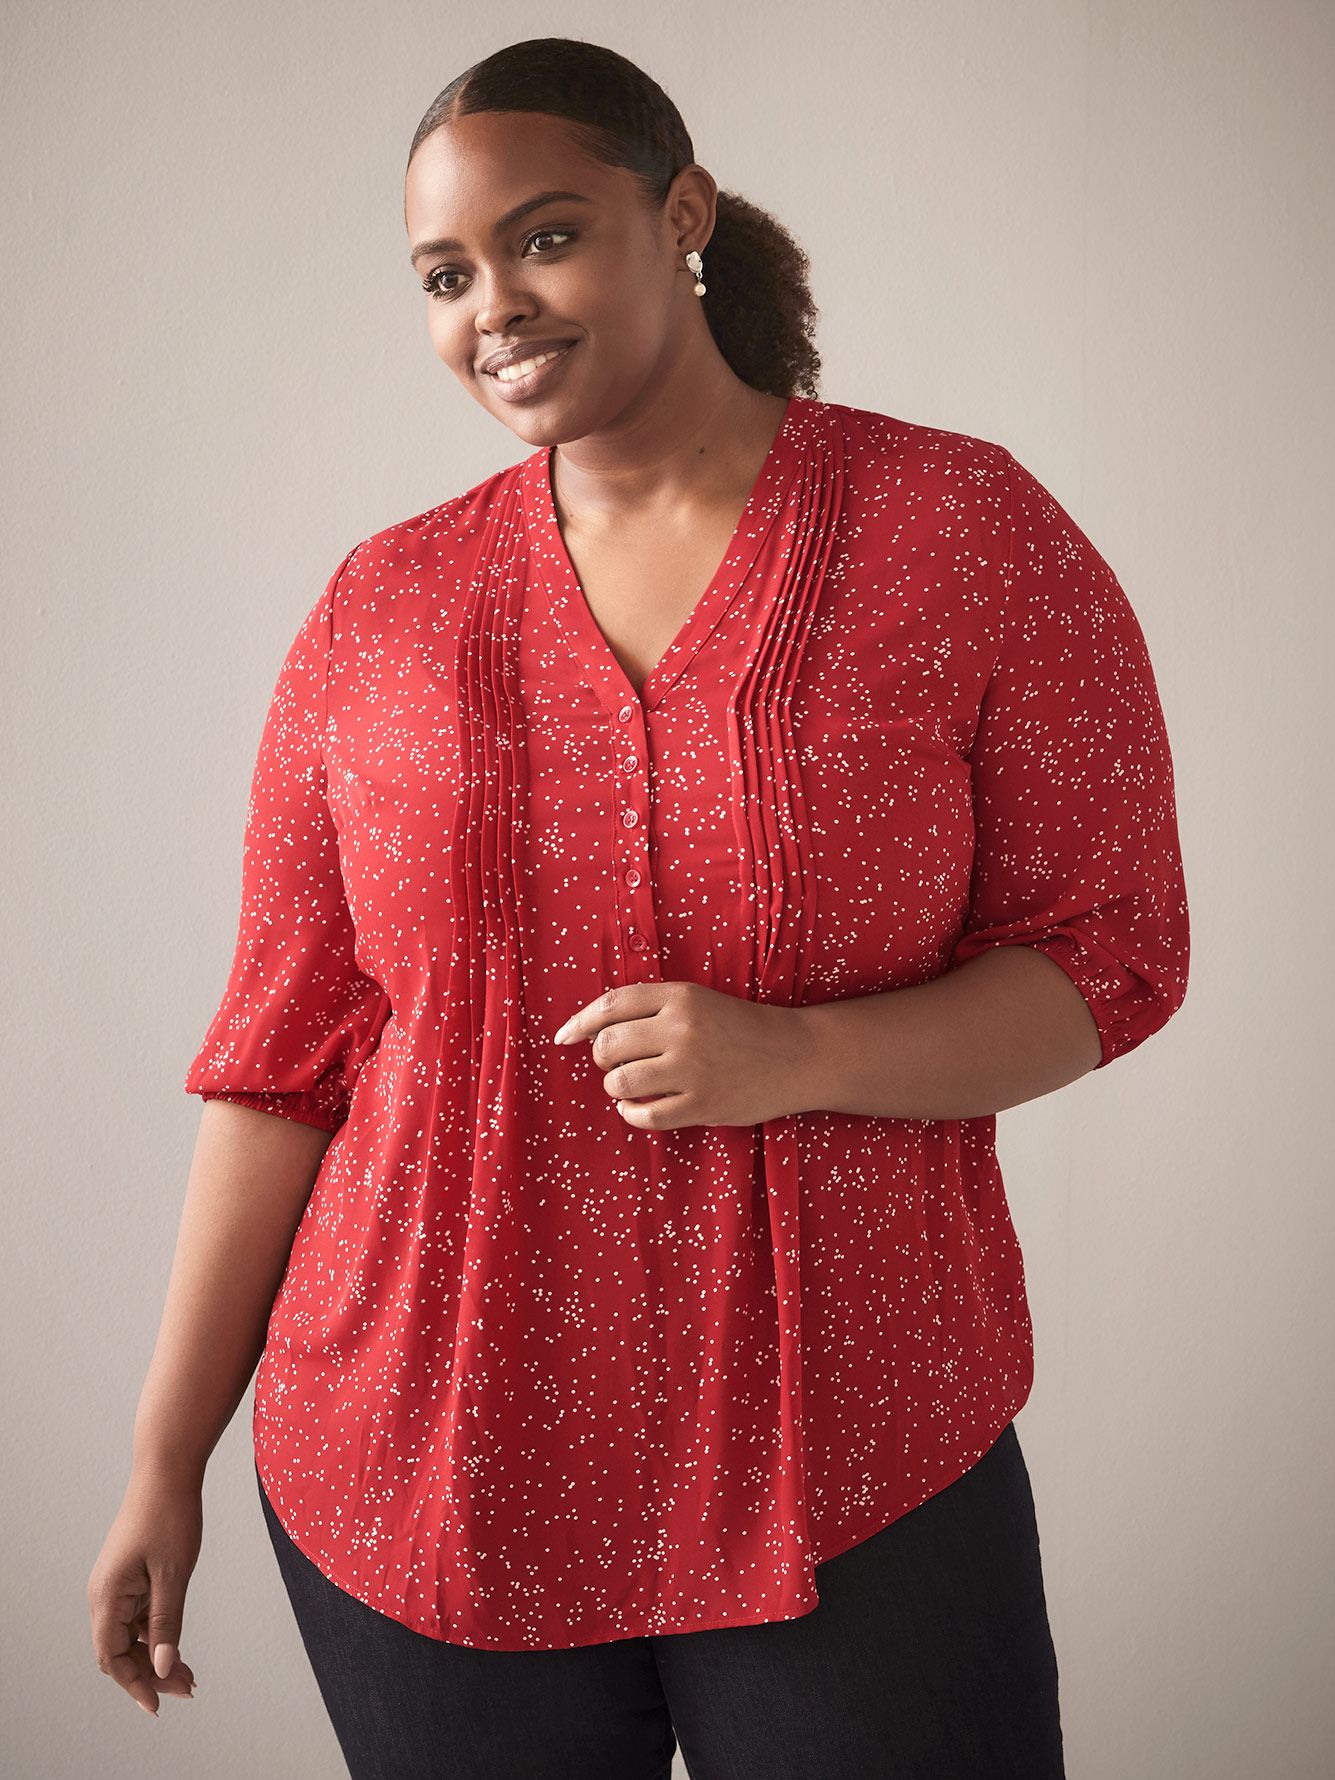 Pin-Tuck Blouse - In Every Story | Penningtons